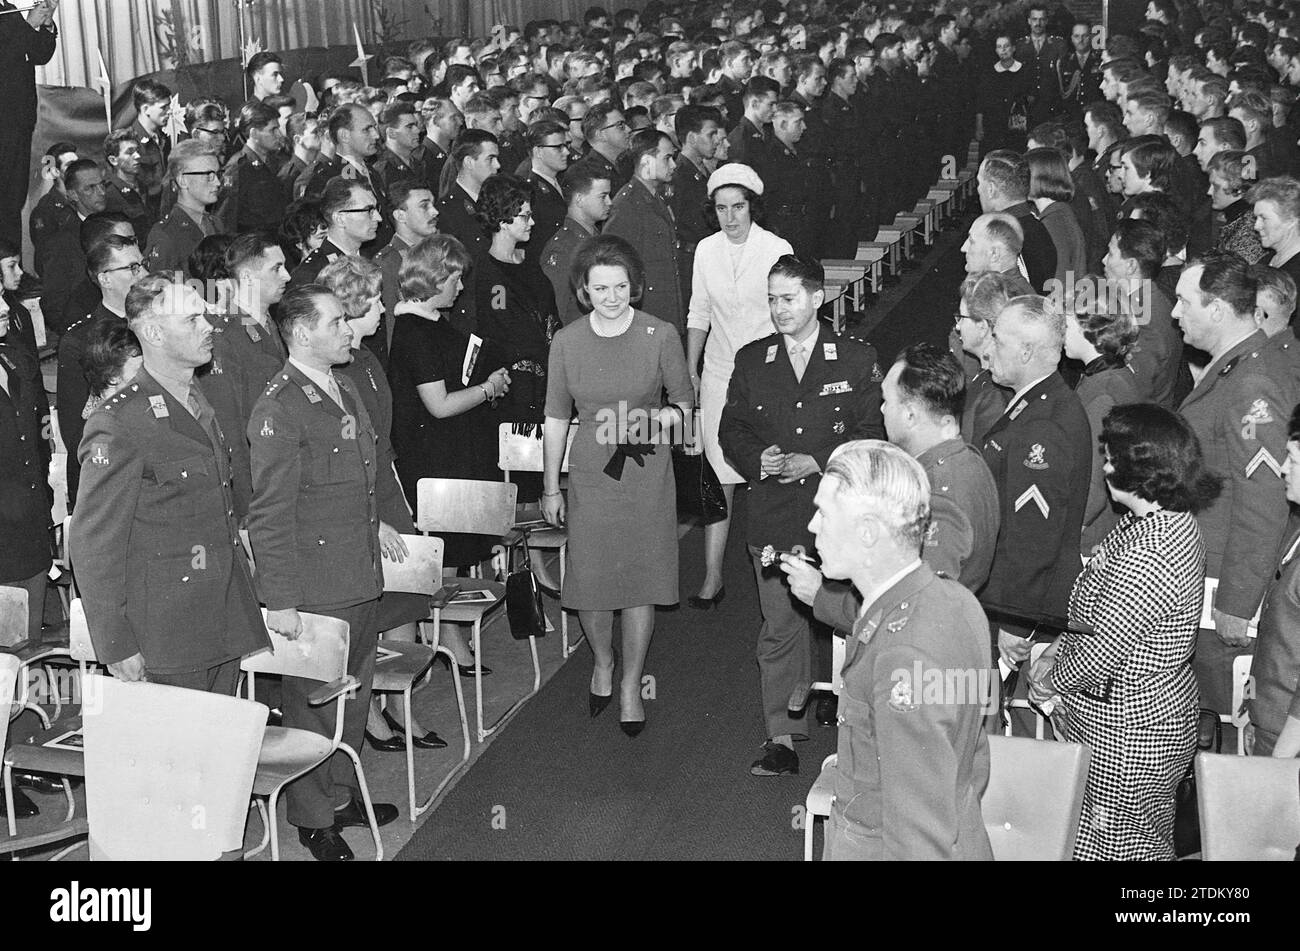 Princess Irene Christmas Gospel Schalkhaar, Royal receptions and Royal visits, 23-12-1963, Whizgle News from the Past, Tailored for the Future. Explore historical narratives, Dutch The Netherlands agency image with a modern perspective, bridging the gap between yesterday's events and tomorrow's insights. A timeless journey shaping the stories that shape our future Stock Photo